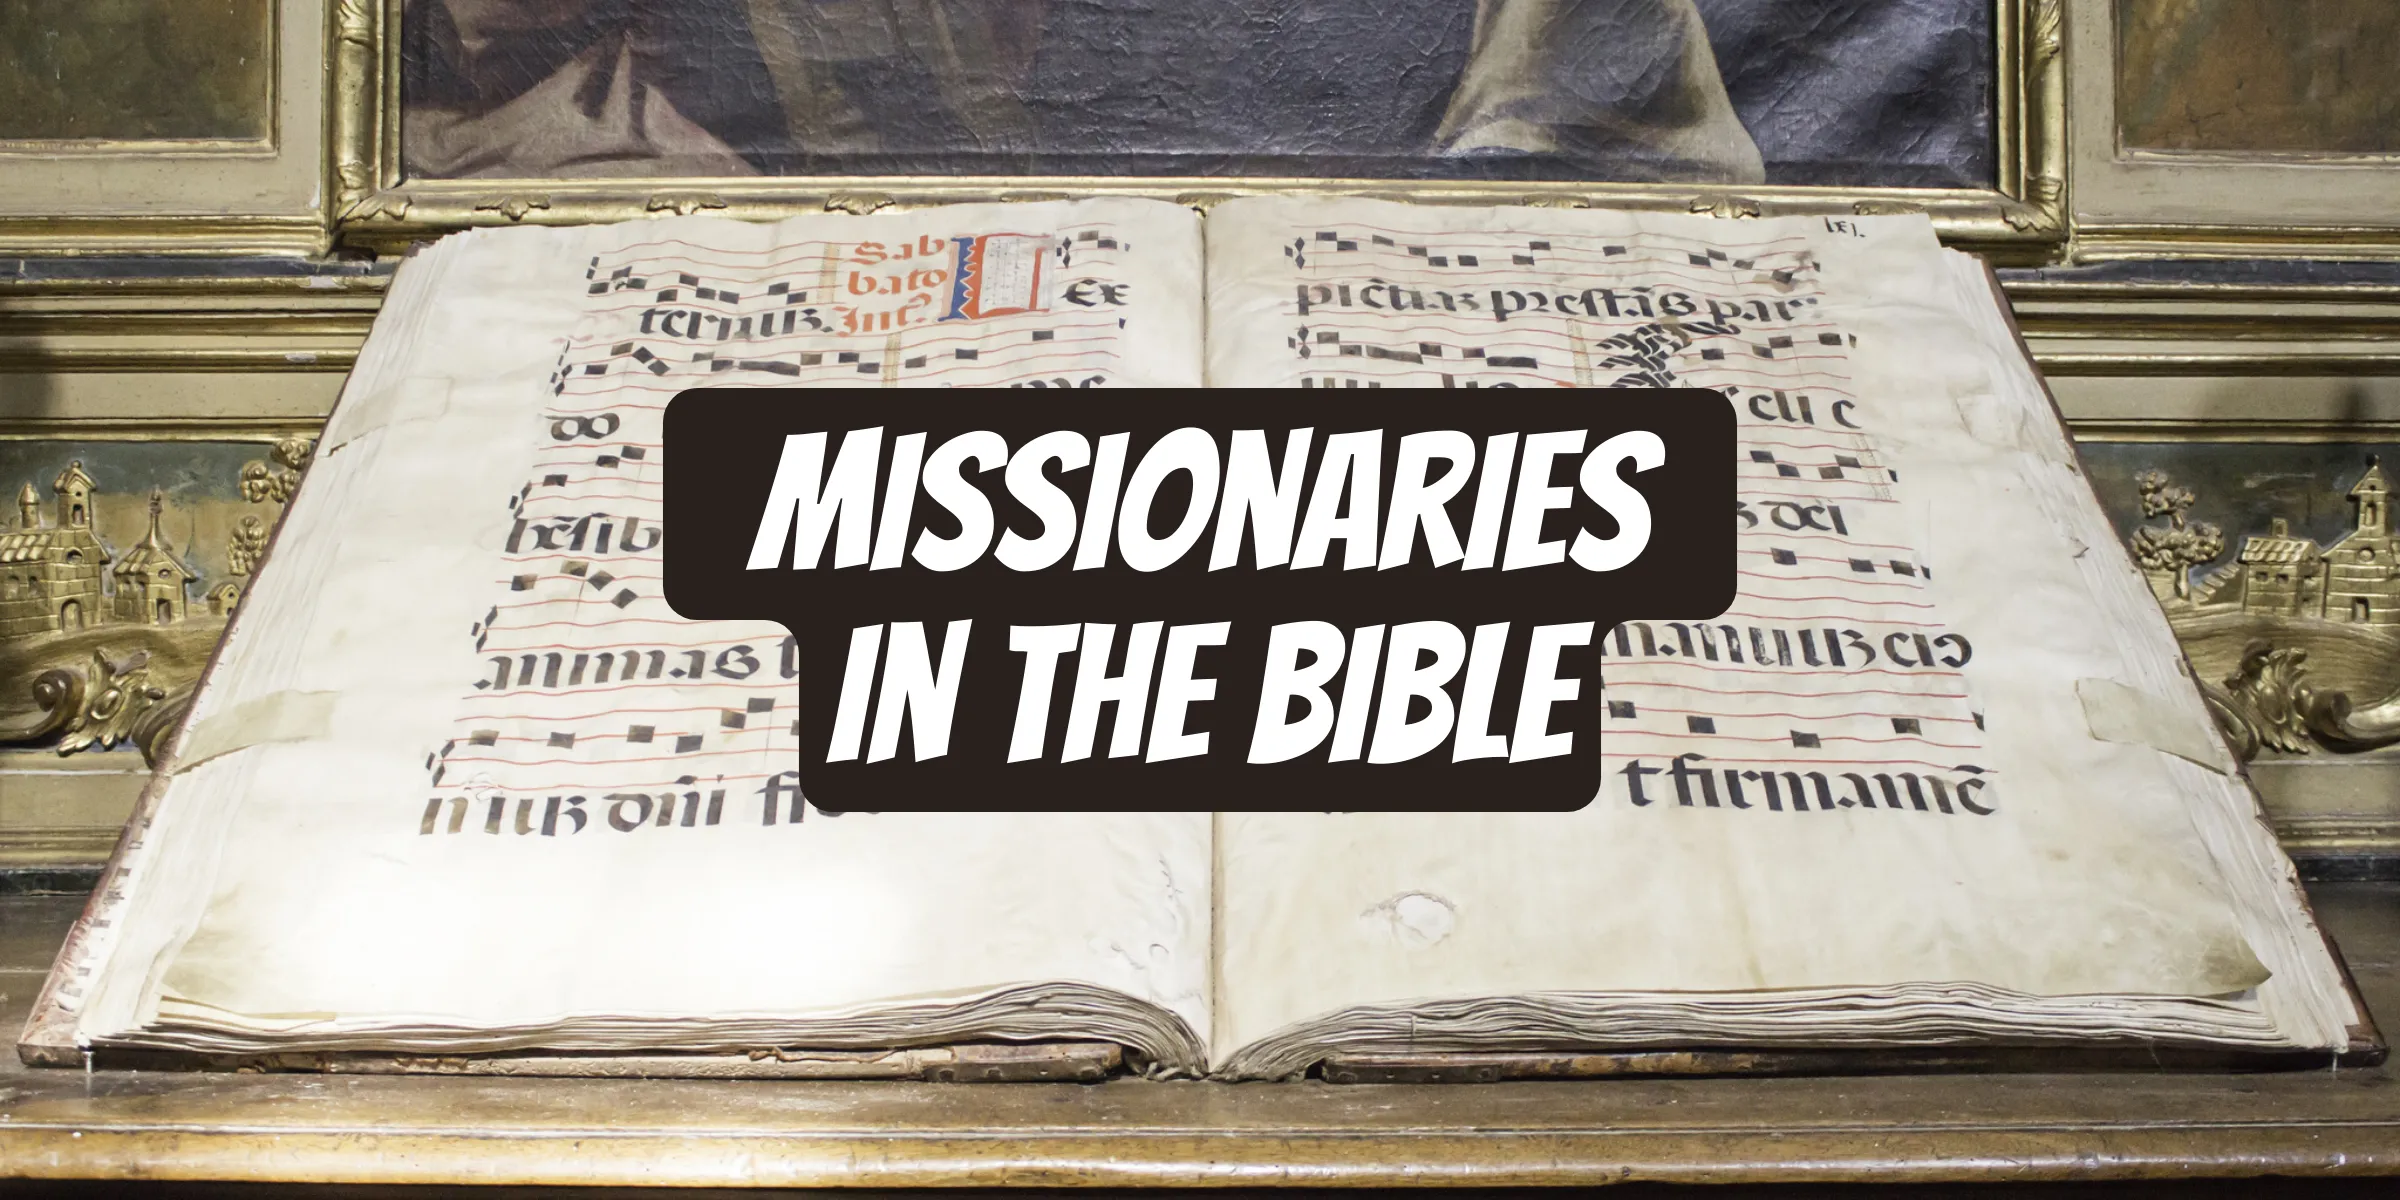 Missionaries in the Bible